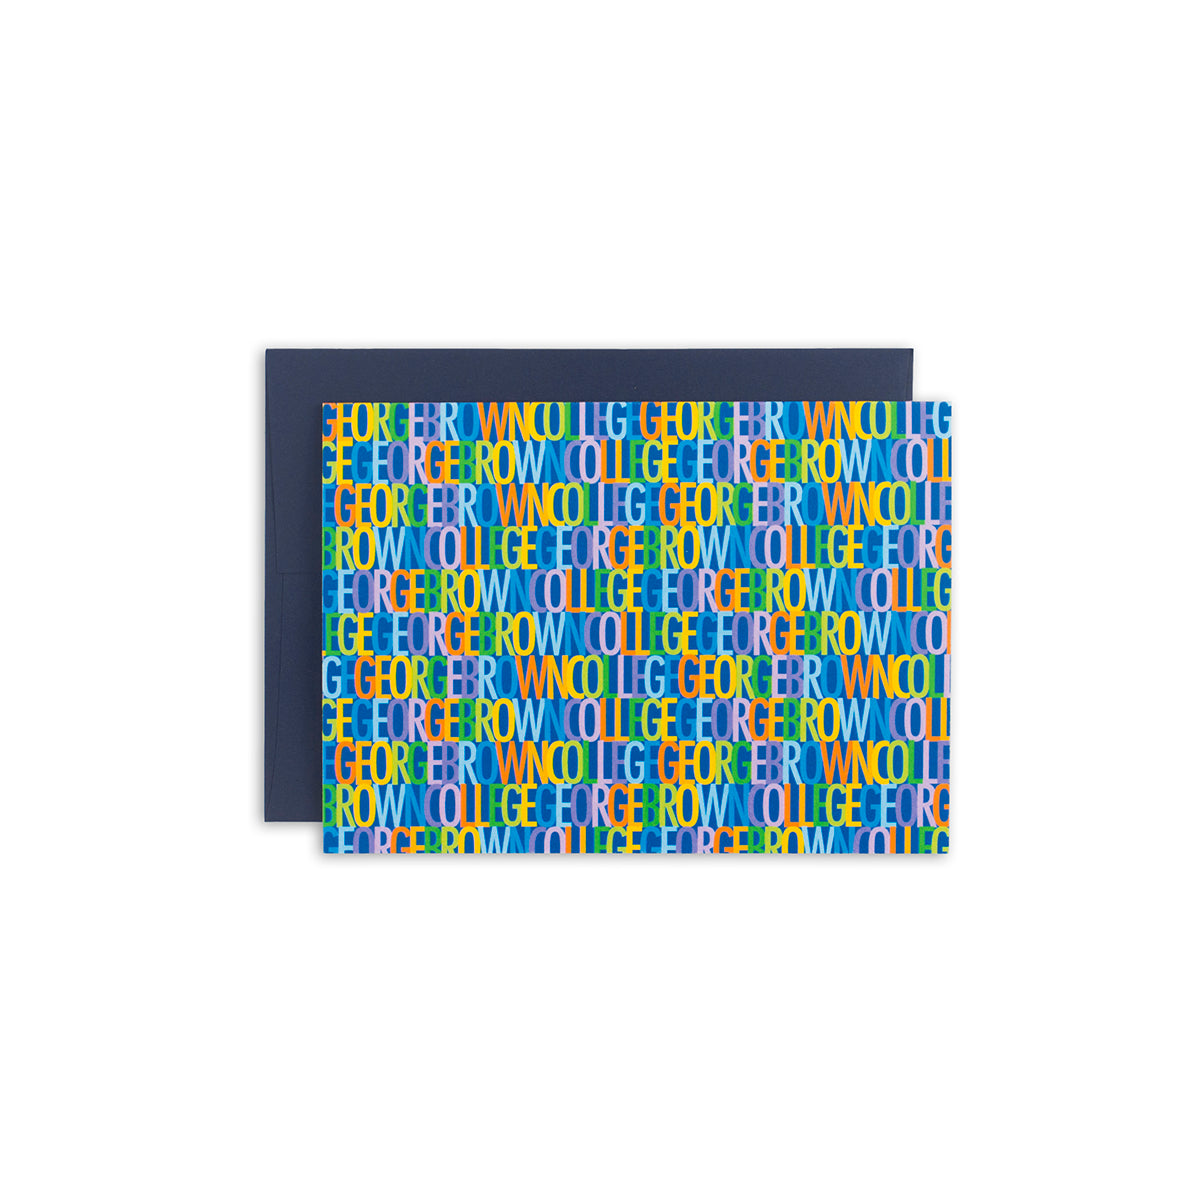 4 1/2" x 6 1/4" greeting card with george brown college condensed text in shades of orange, yellow, purple green and blue